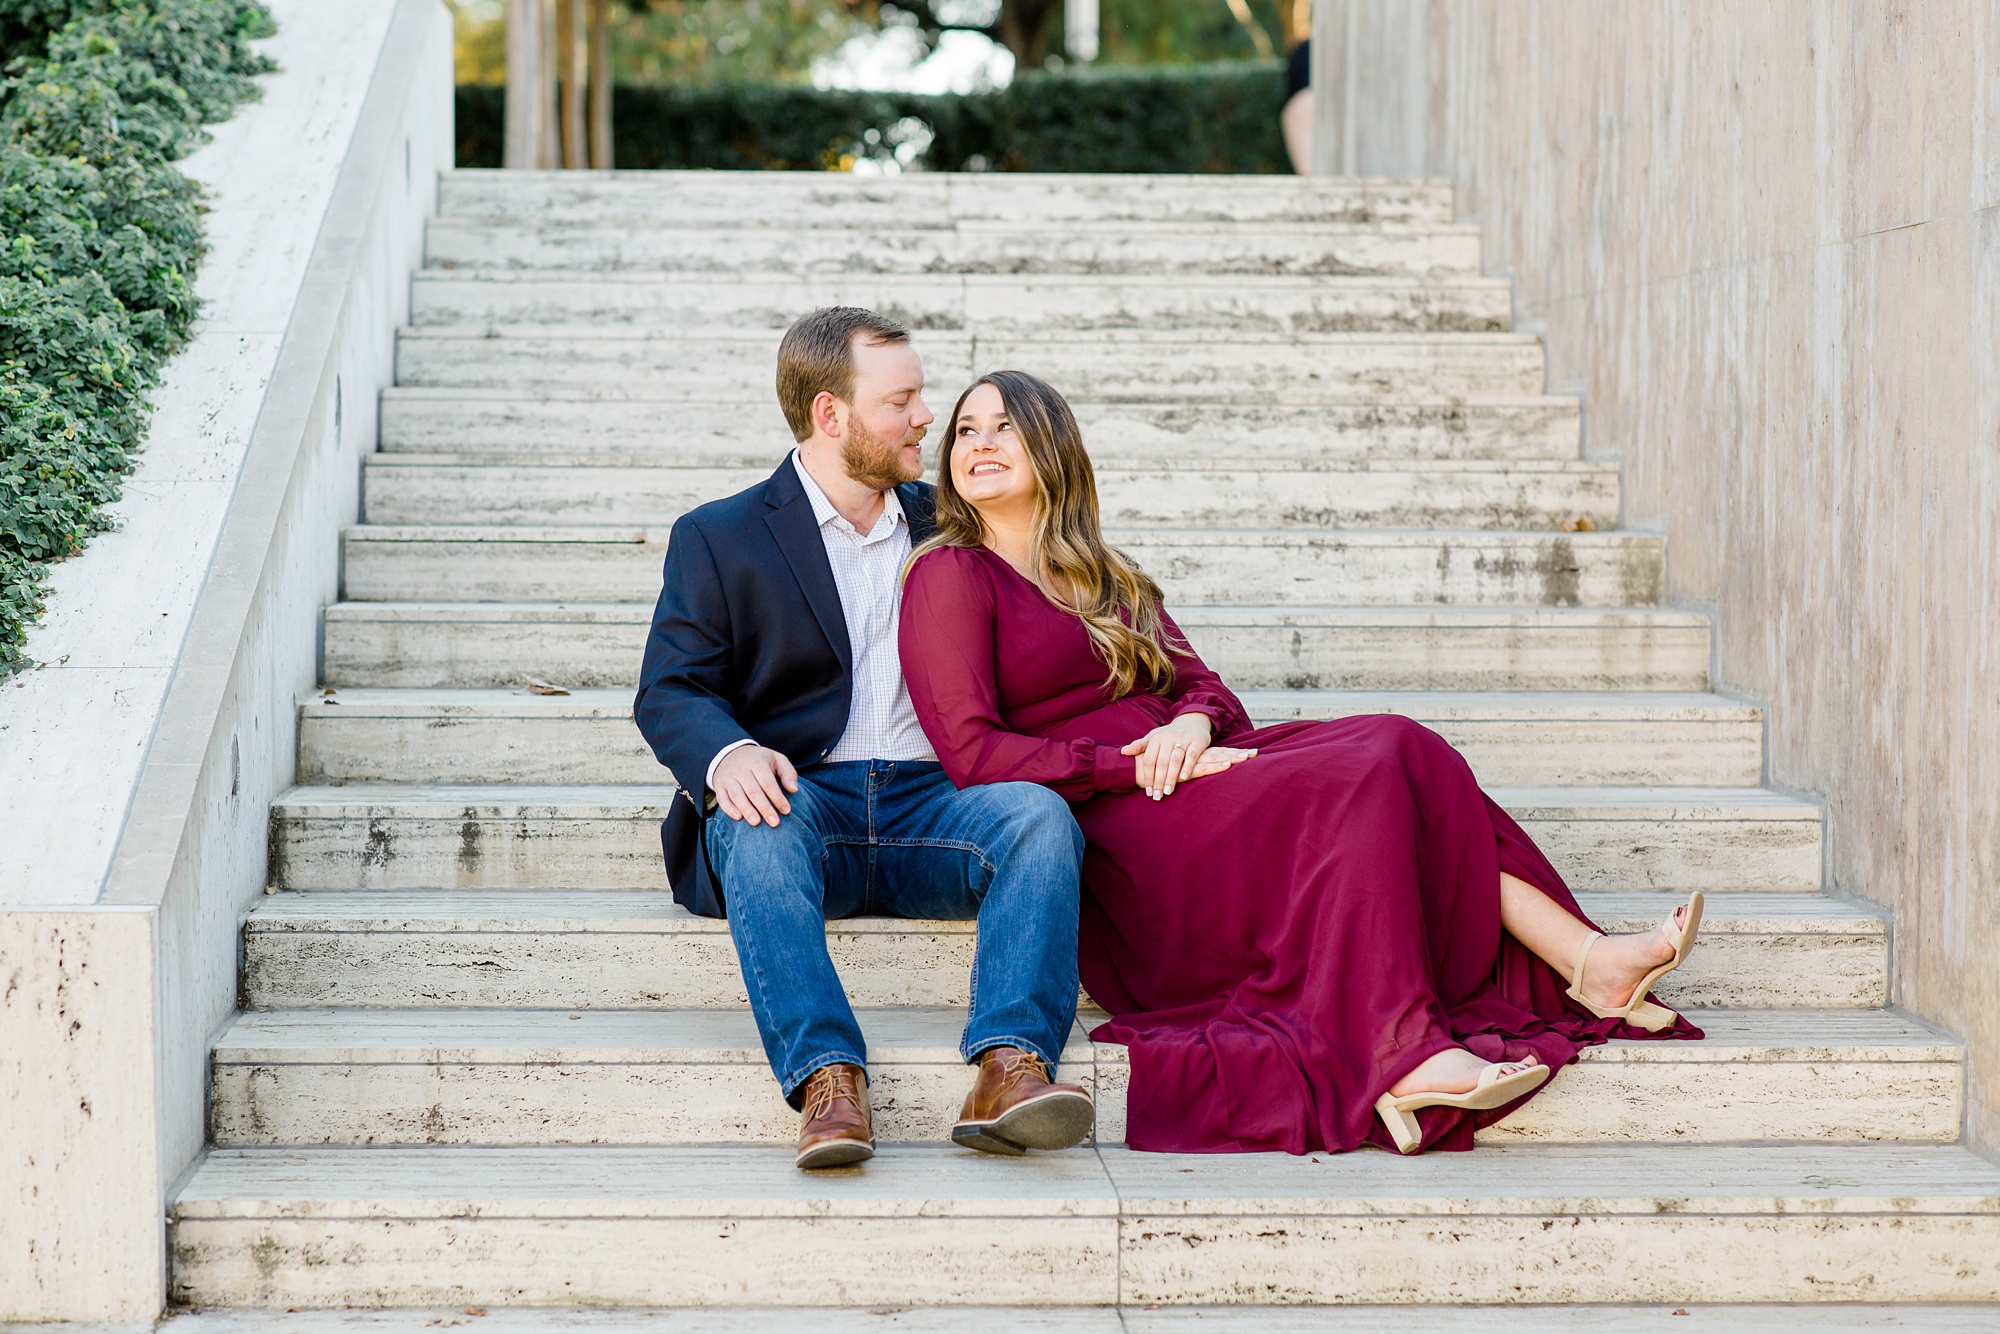 Kimball Art Museum engagement photos on steps